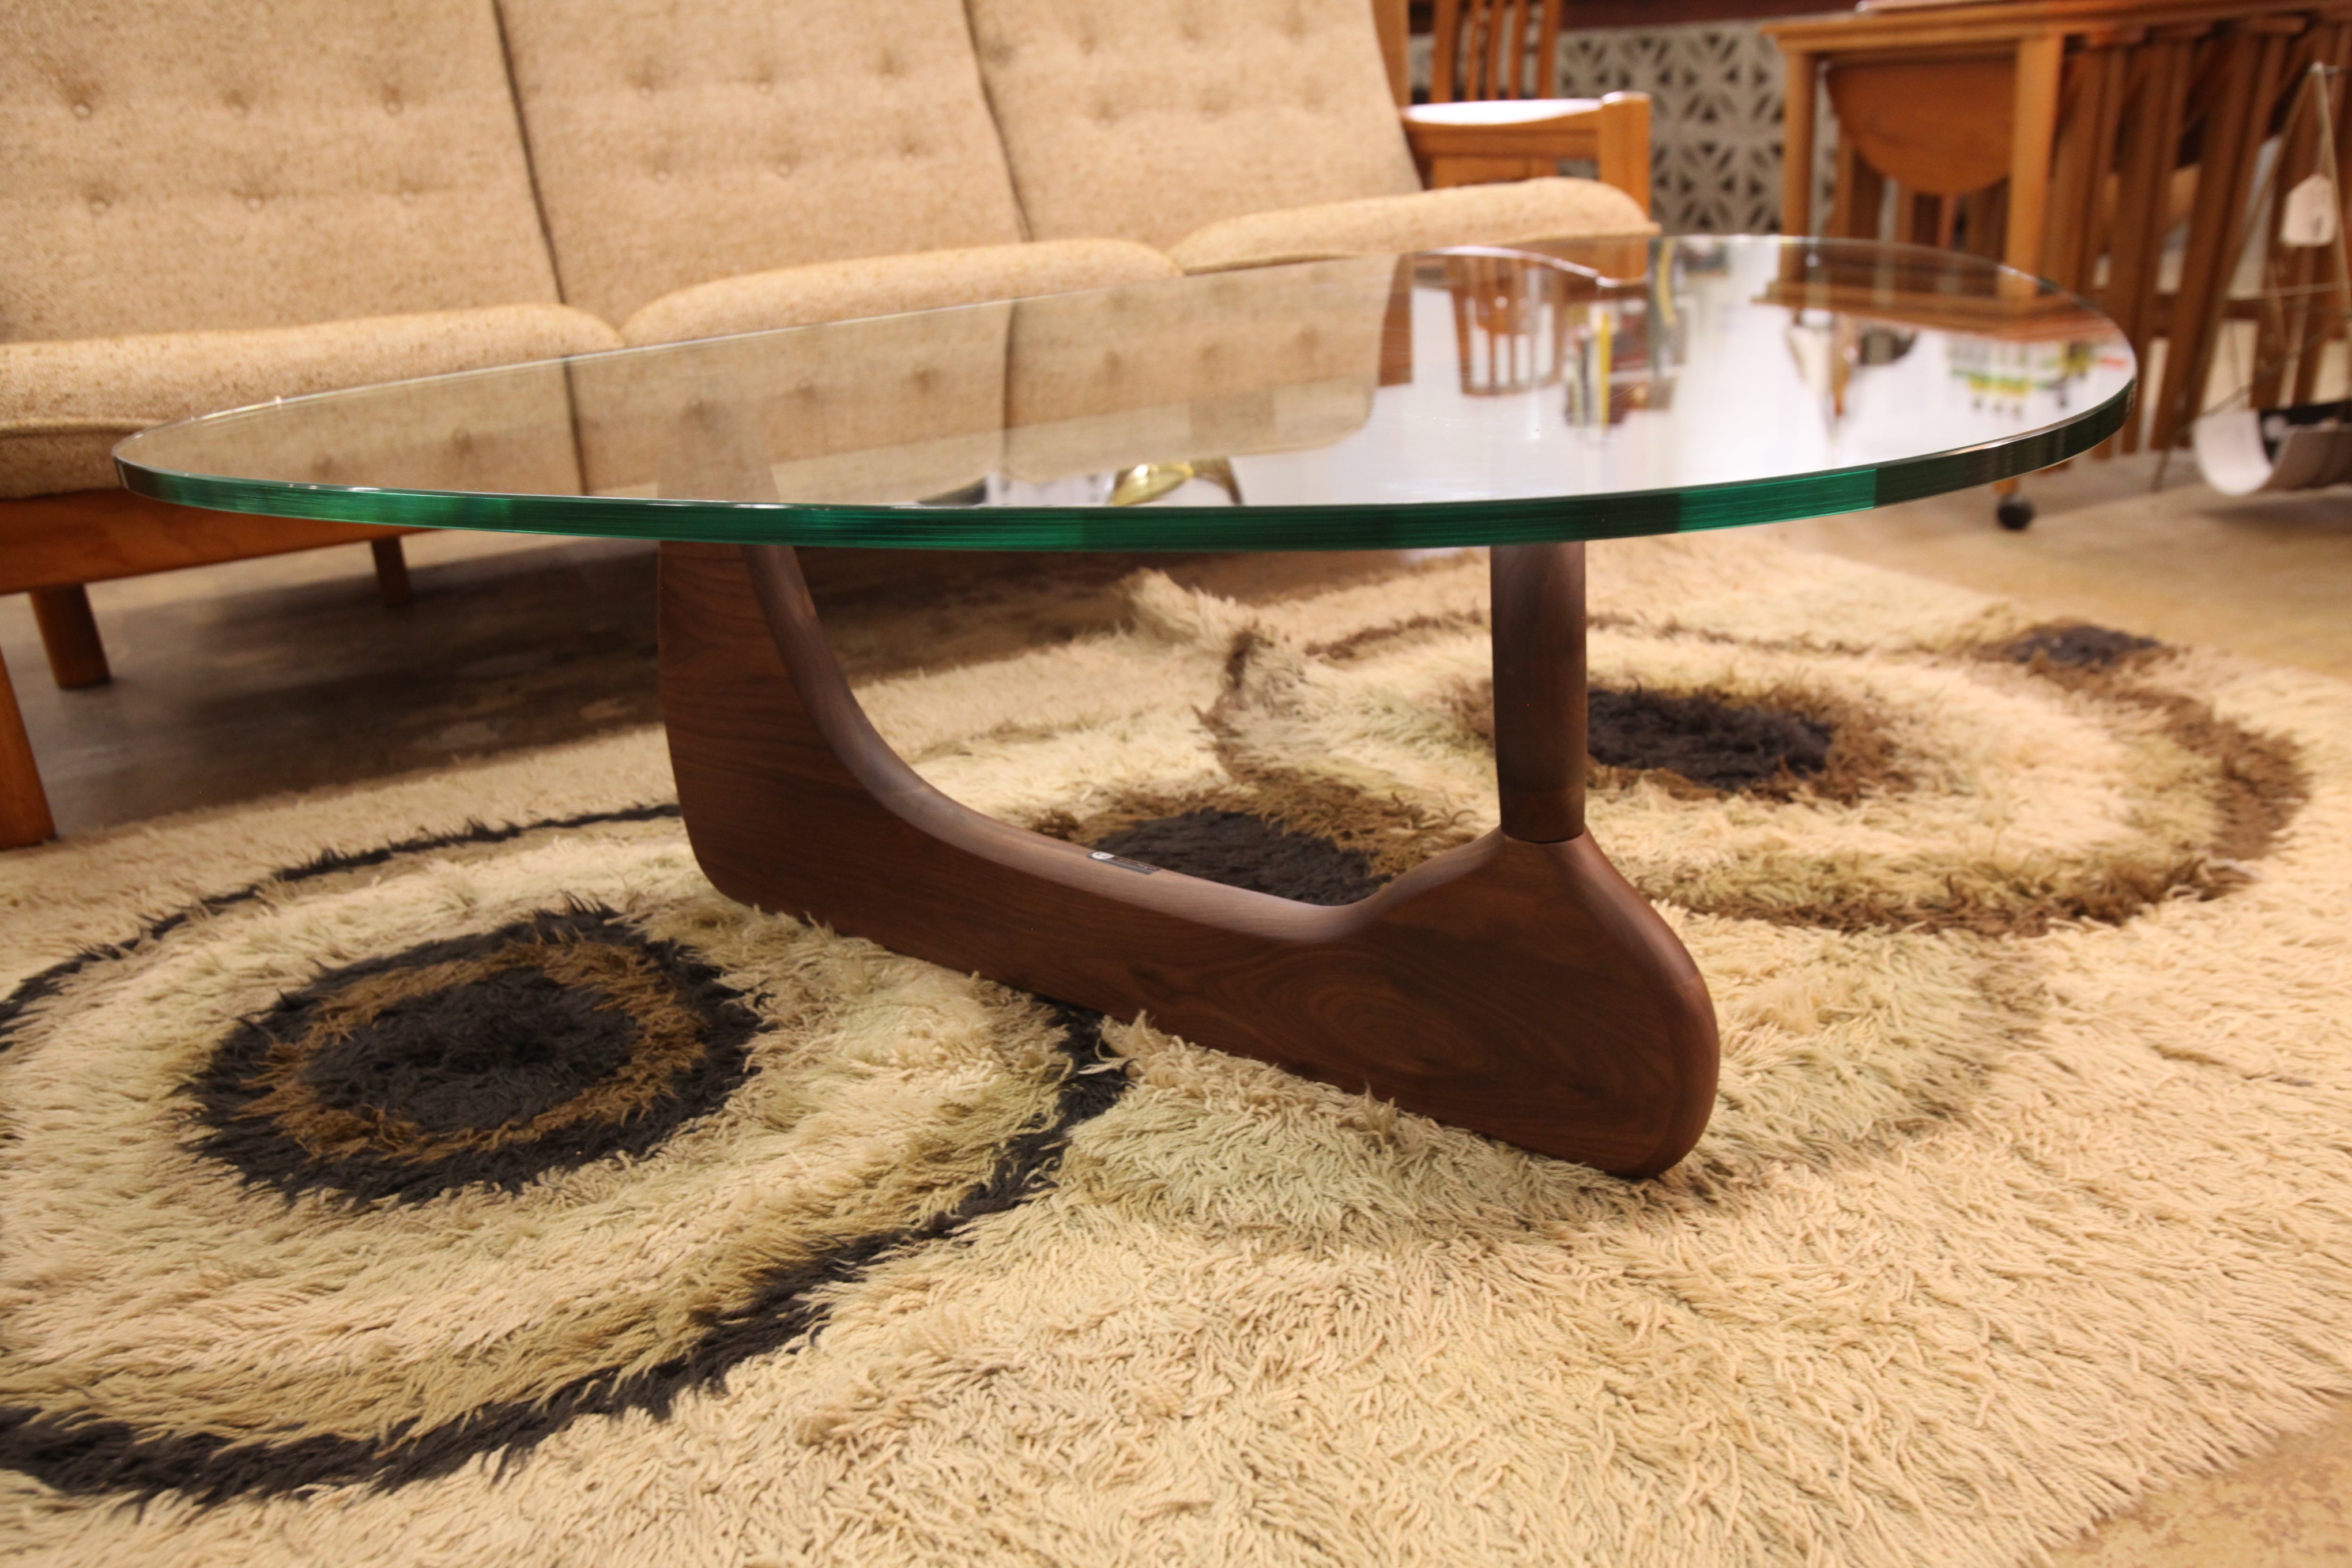 Higher Quality Replica Noguchi Coffee Table w/ Thick Glass Top